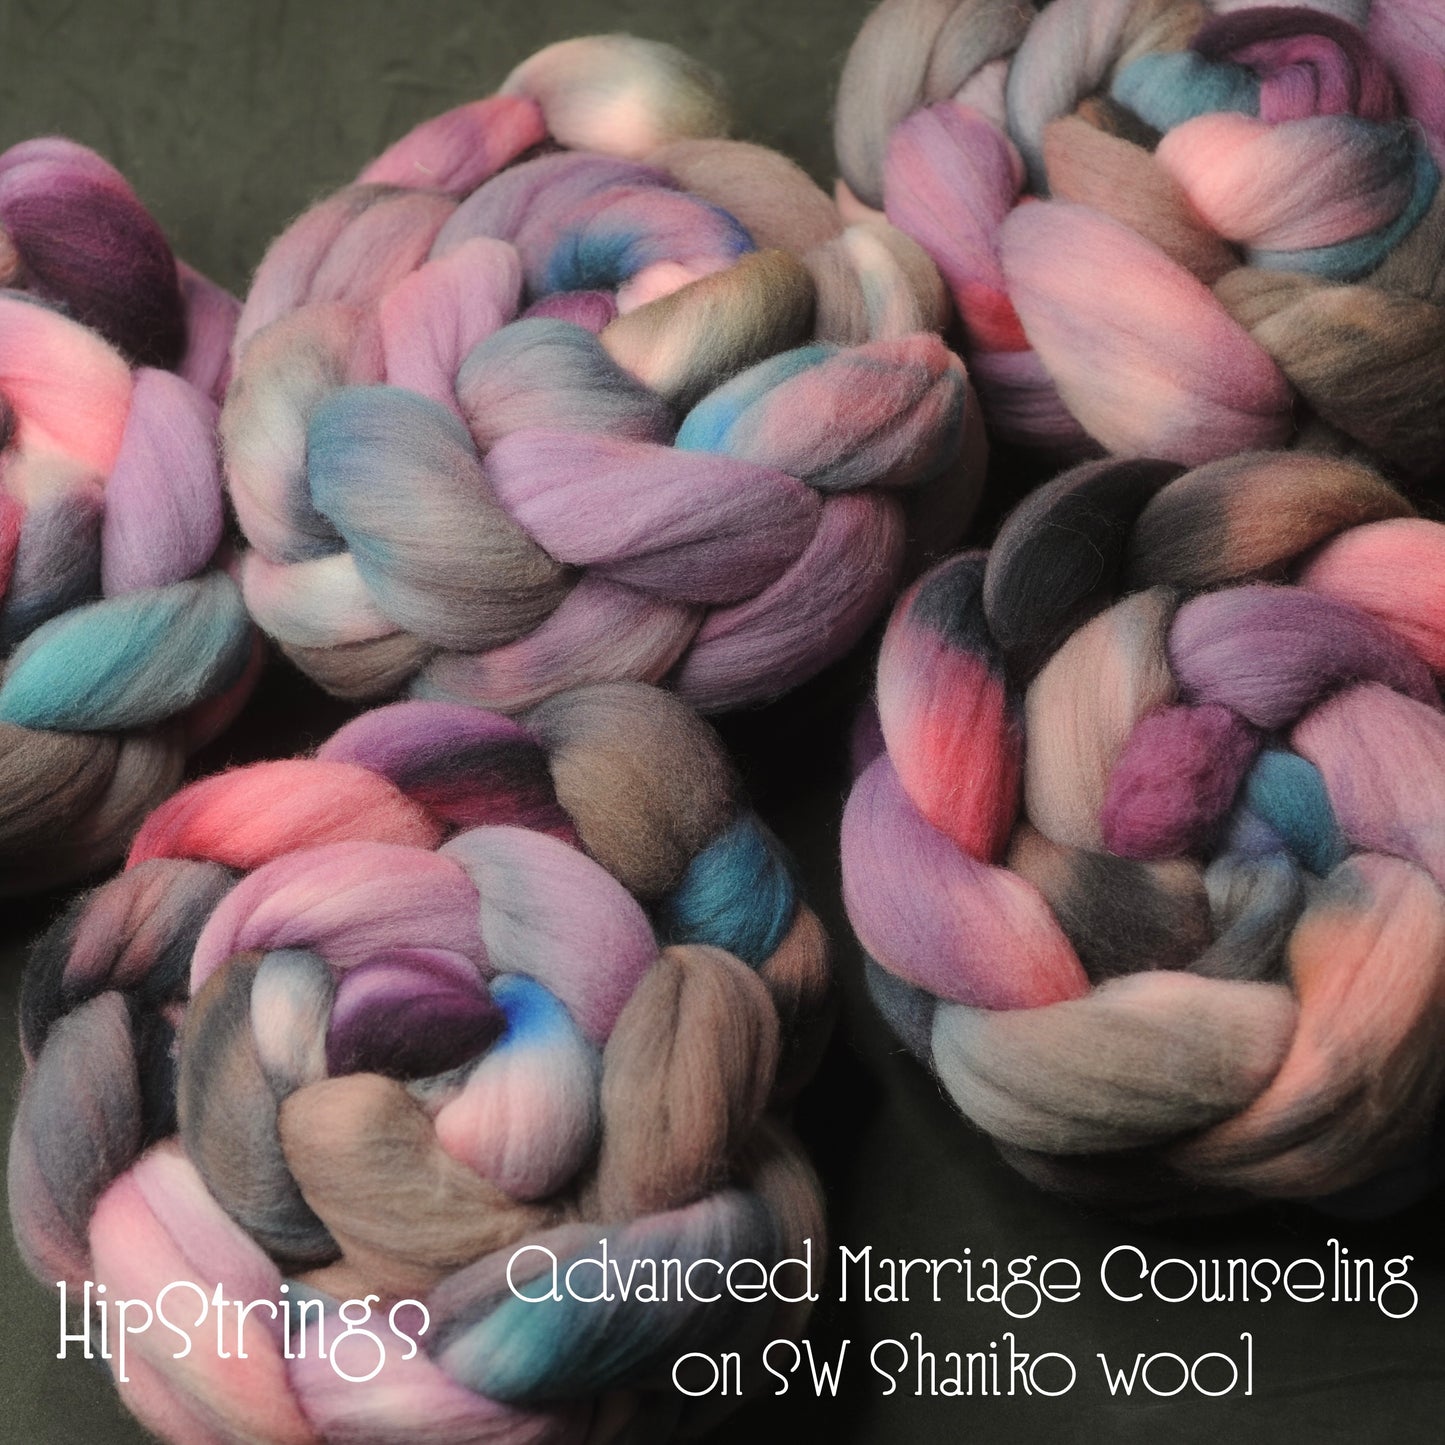 Advanced Marriage Counseling on Hand Dyed SW Shaniko Wool Combed Top - 4 oz